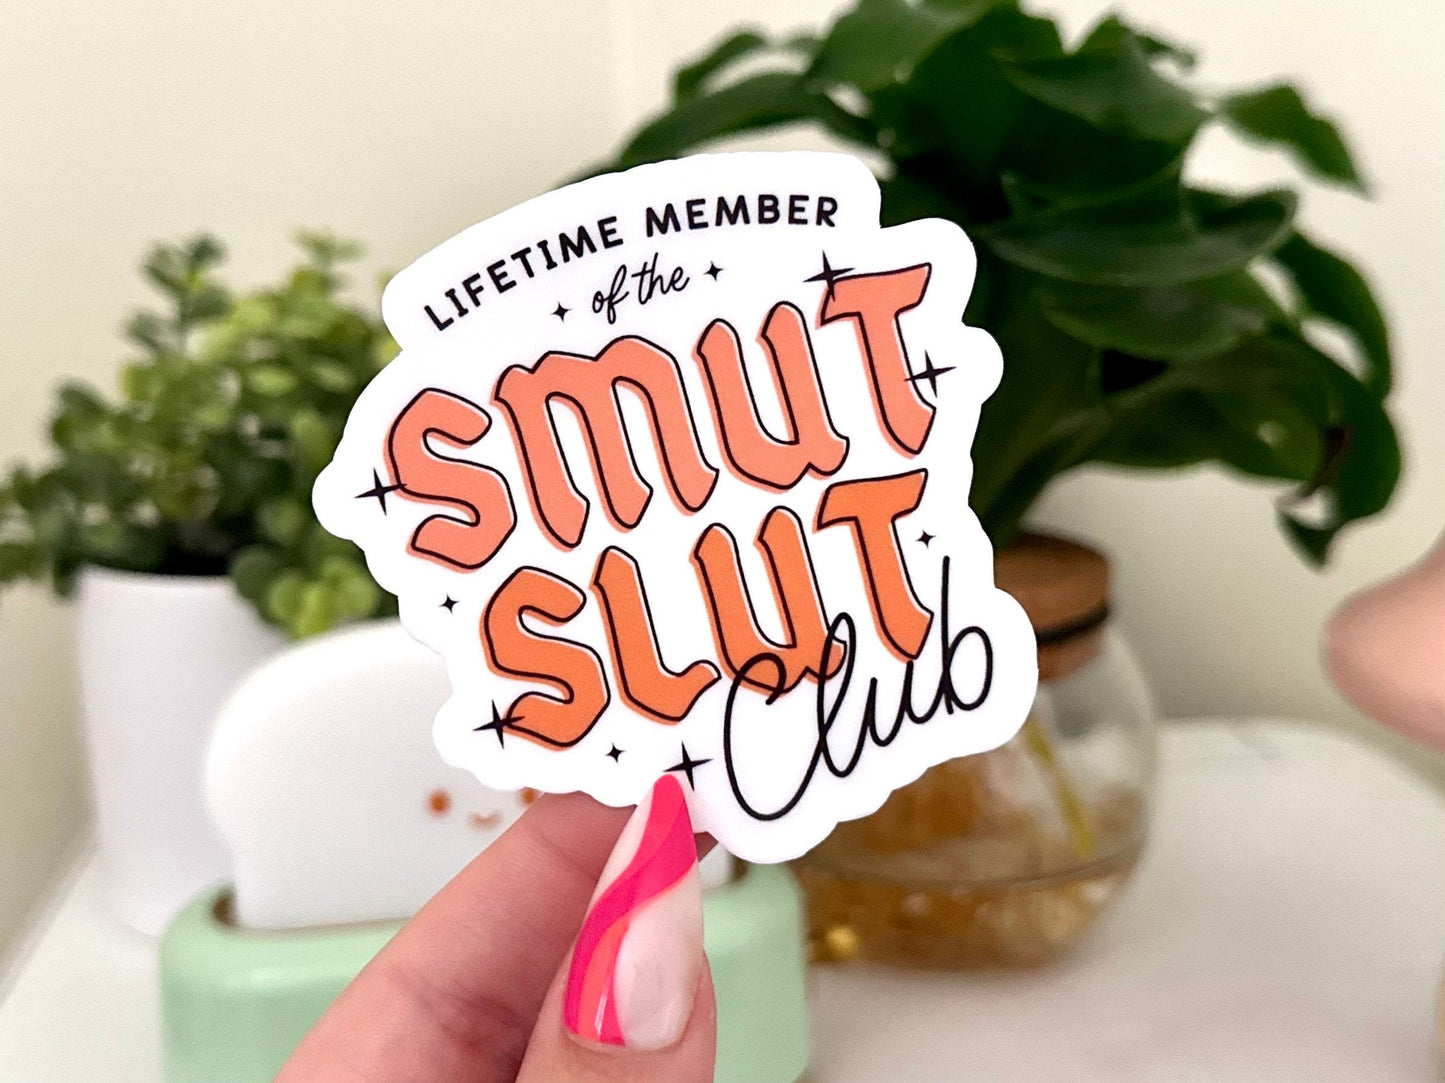 Lifetime Member of the Smut Slut Club Waterproof Sticker, Book Stickers, Gifts for Readers, Book Gifts, Reading Sticker for Mug Waterbottle